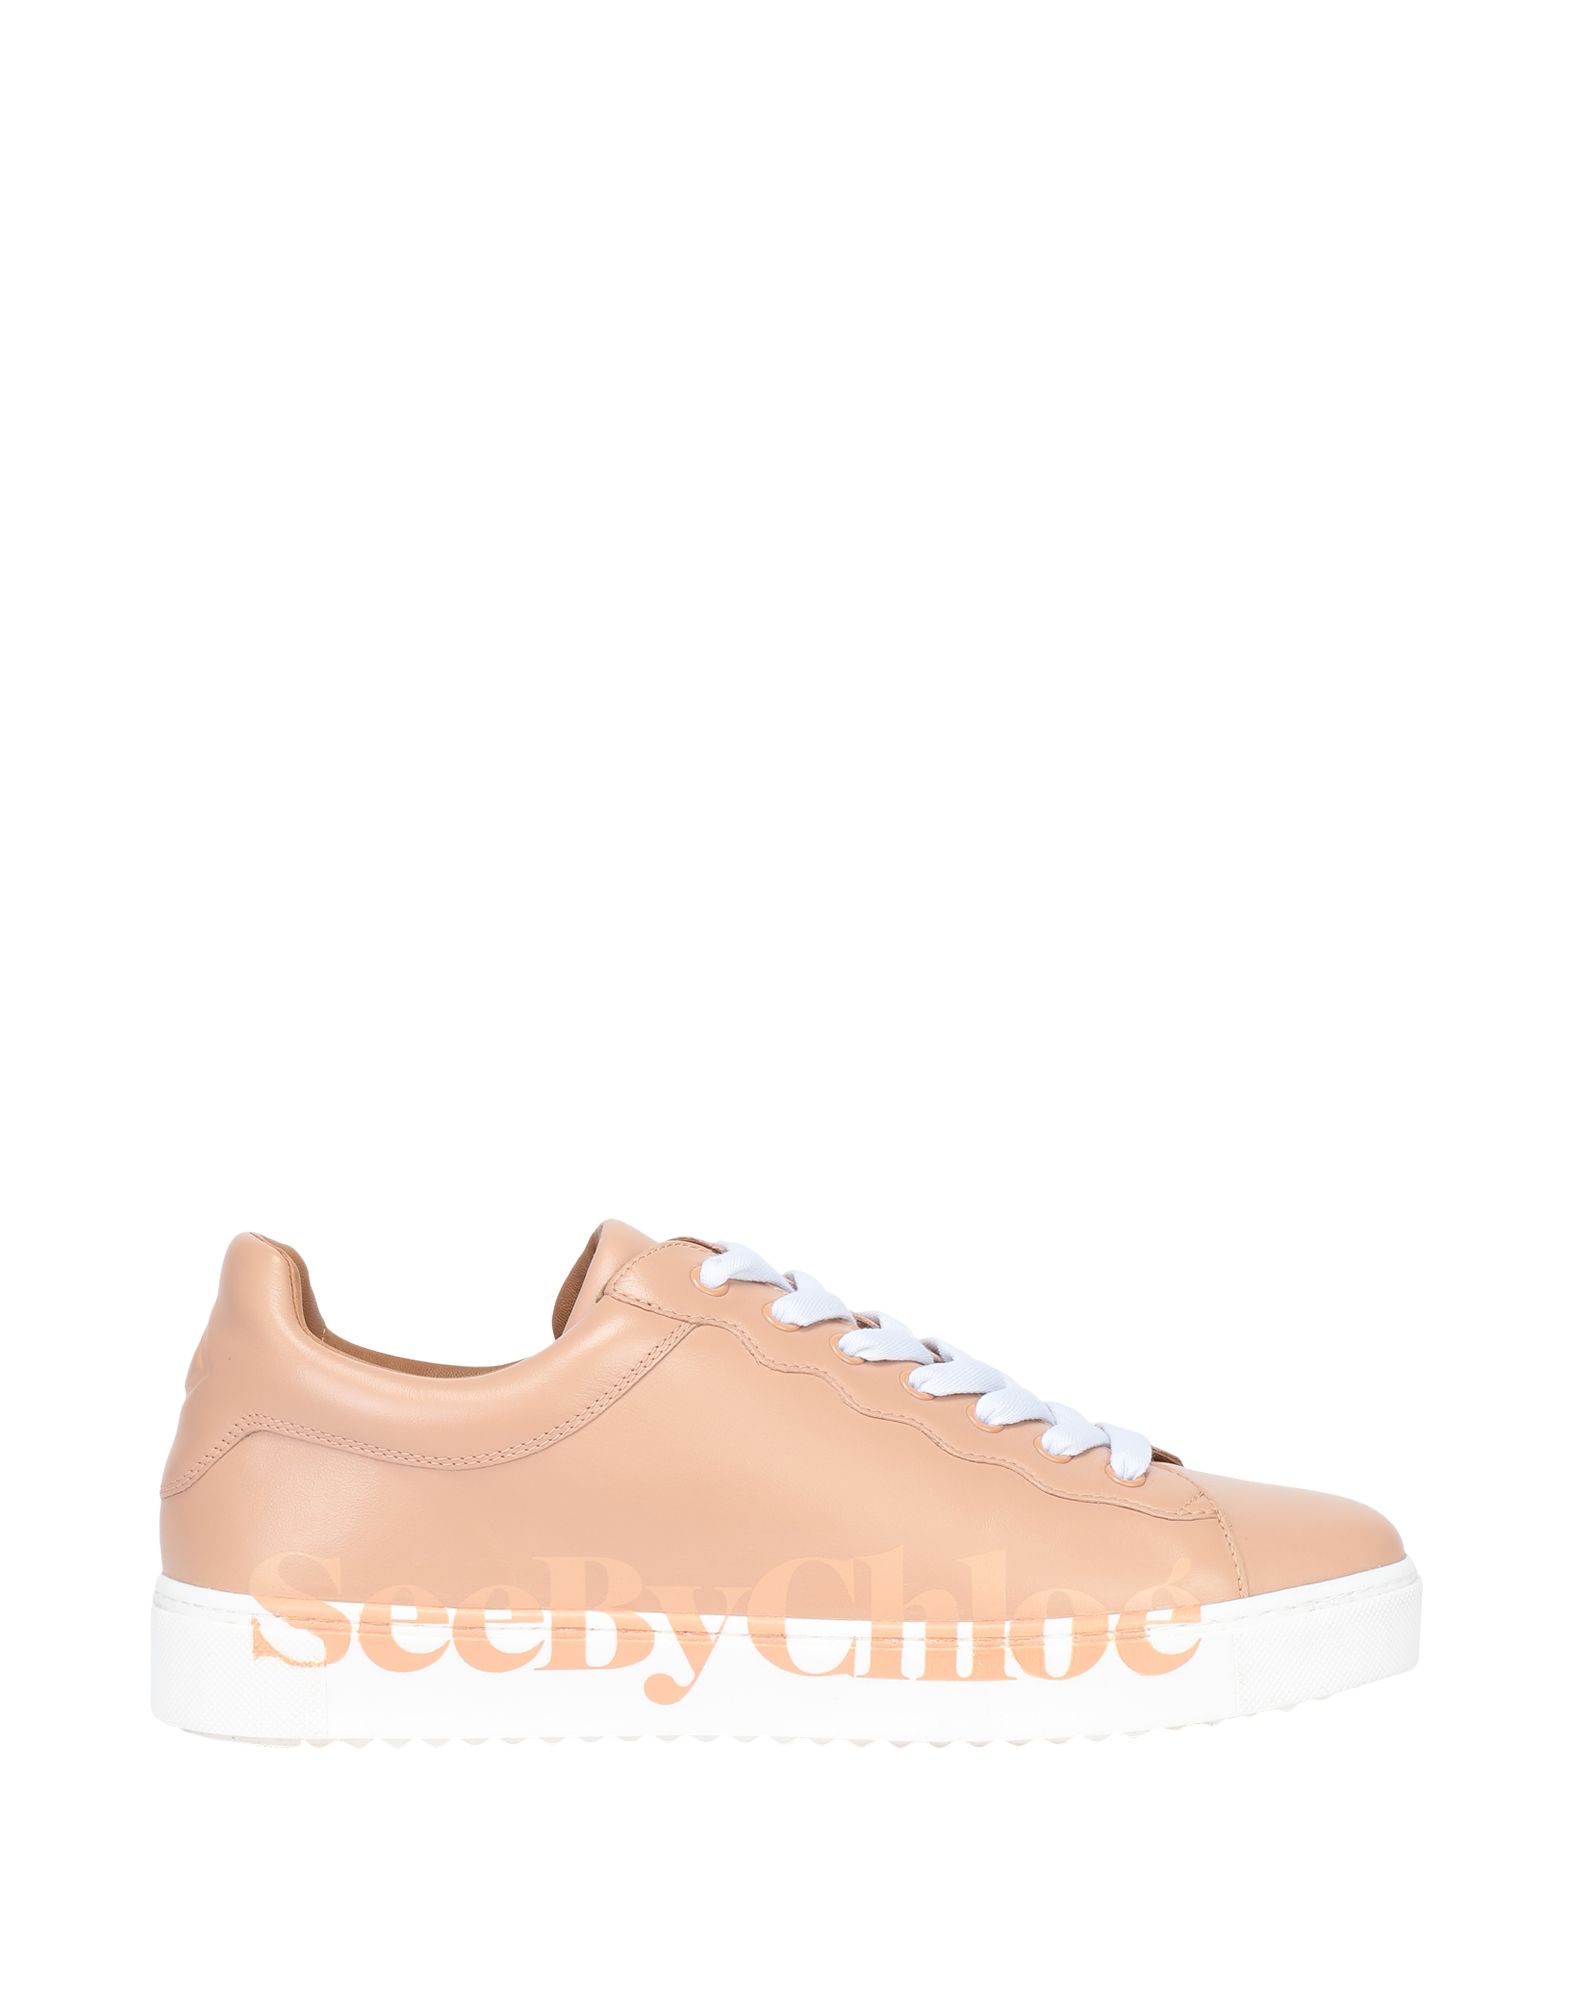 SEE BY CHLOÉ Sneakers Damen Hellrosa von SEE BY CHLOÉ